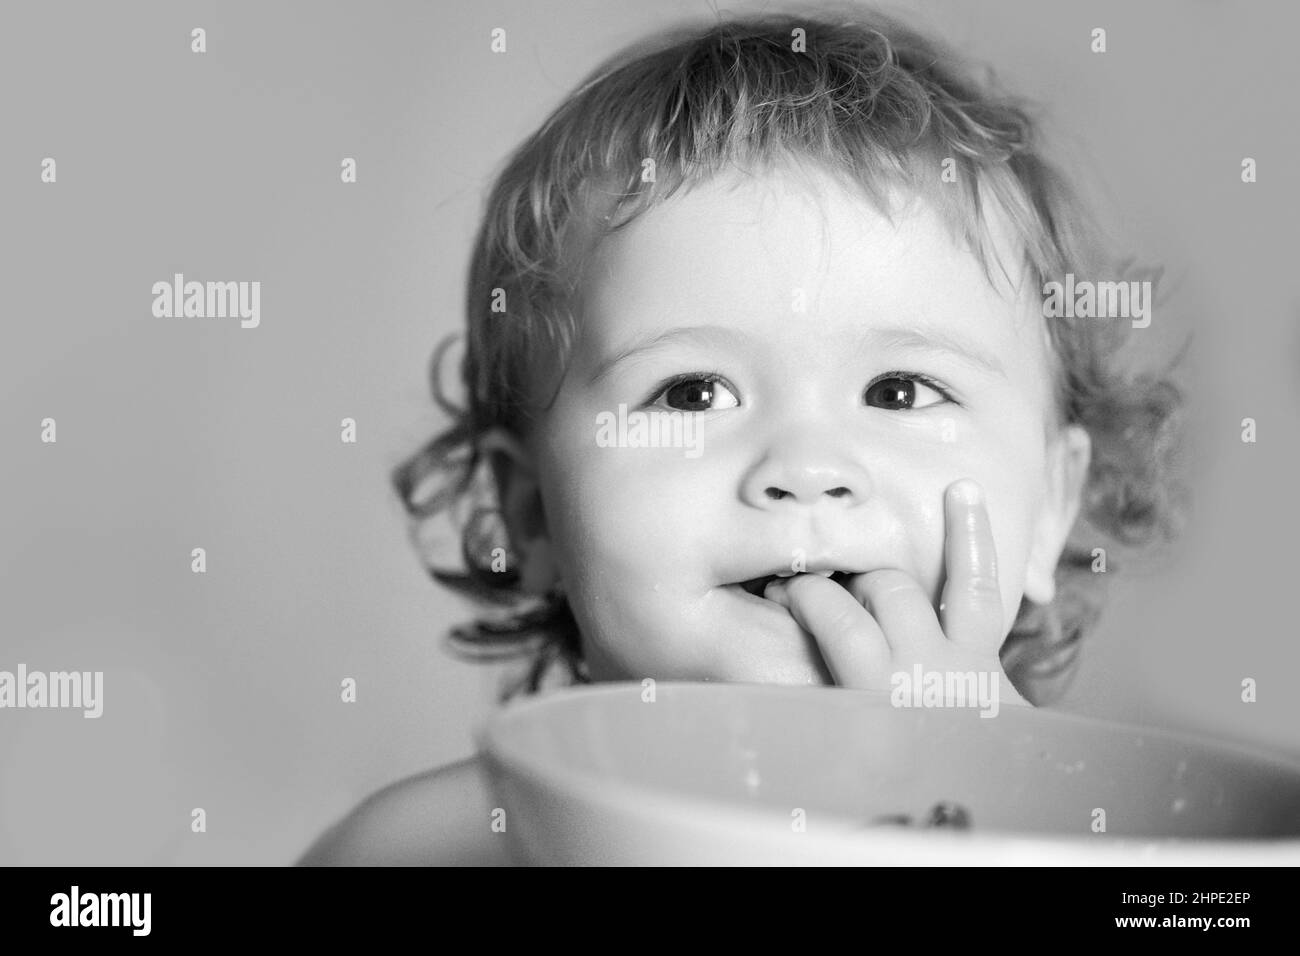 Smiling baby eating food. Healthy nutrition for kids. Funny child face closeup. Stock Photo